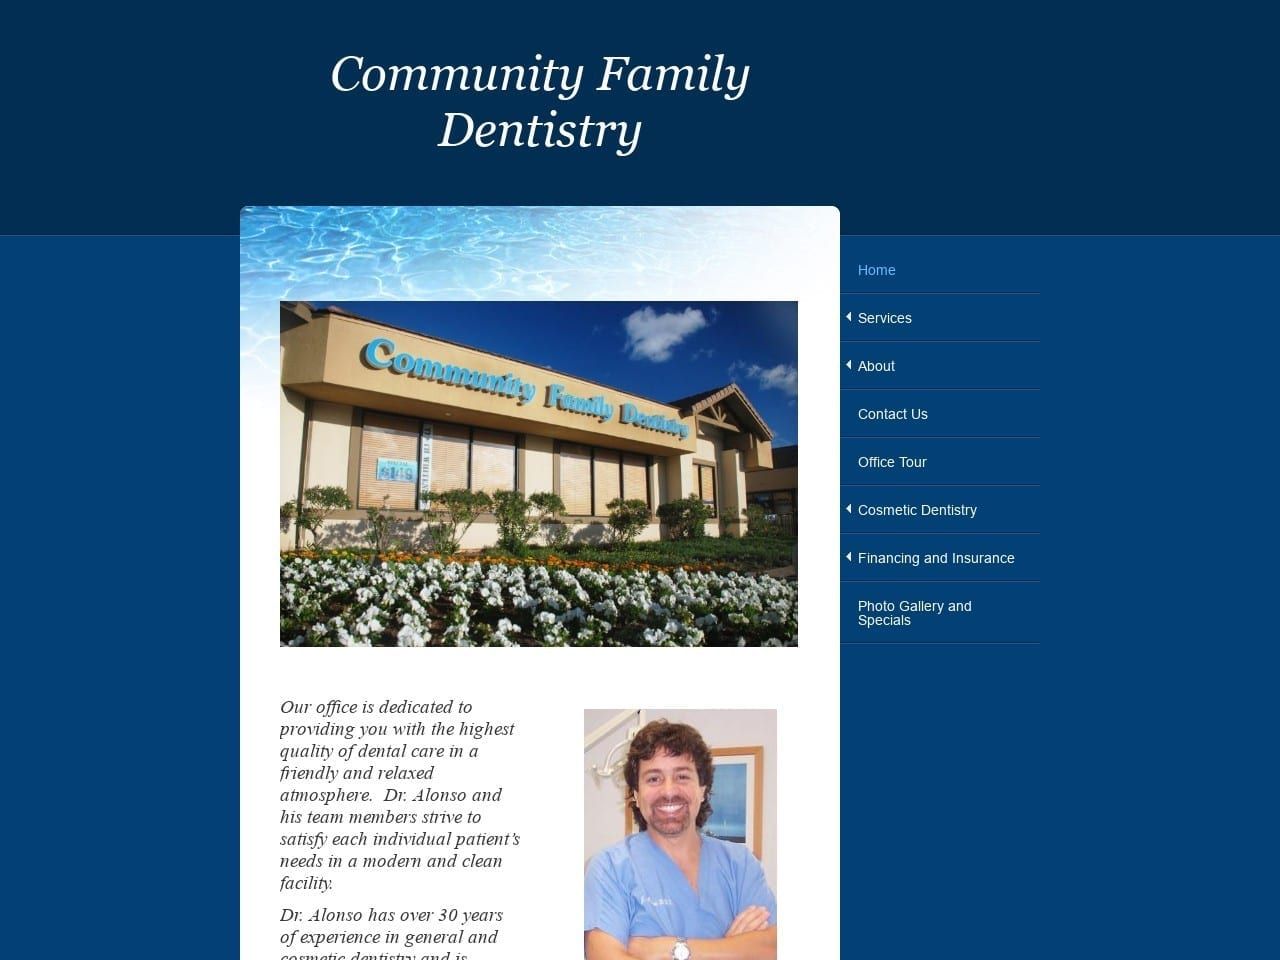 Community Family Dentist Website Screenshot from smilesbydralonso.com